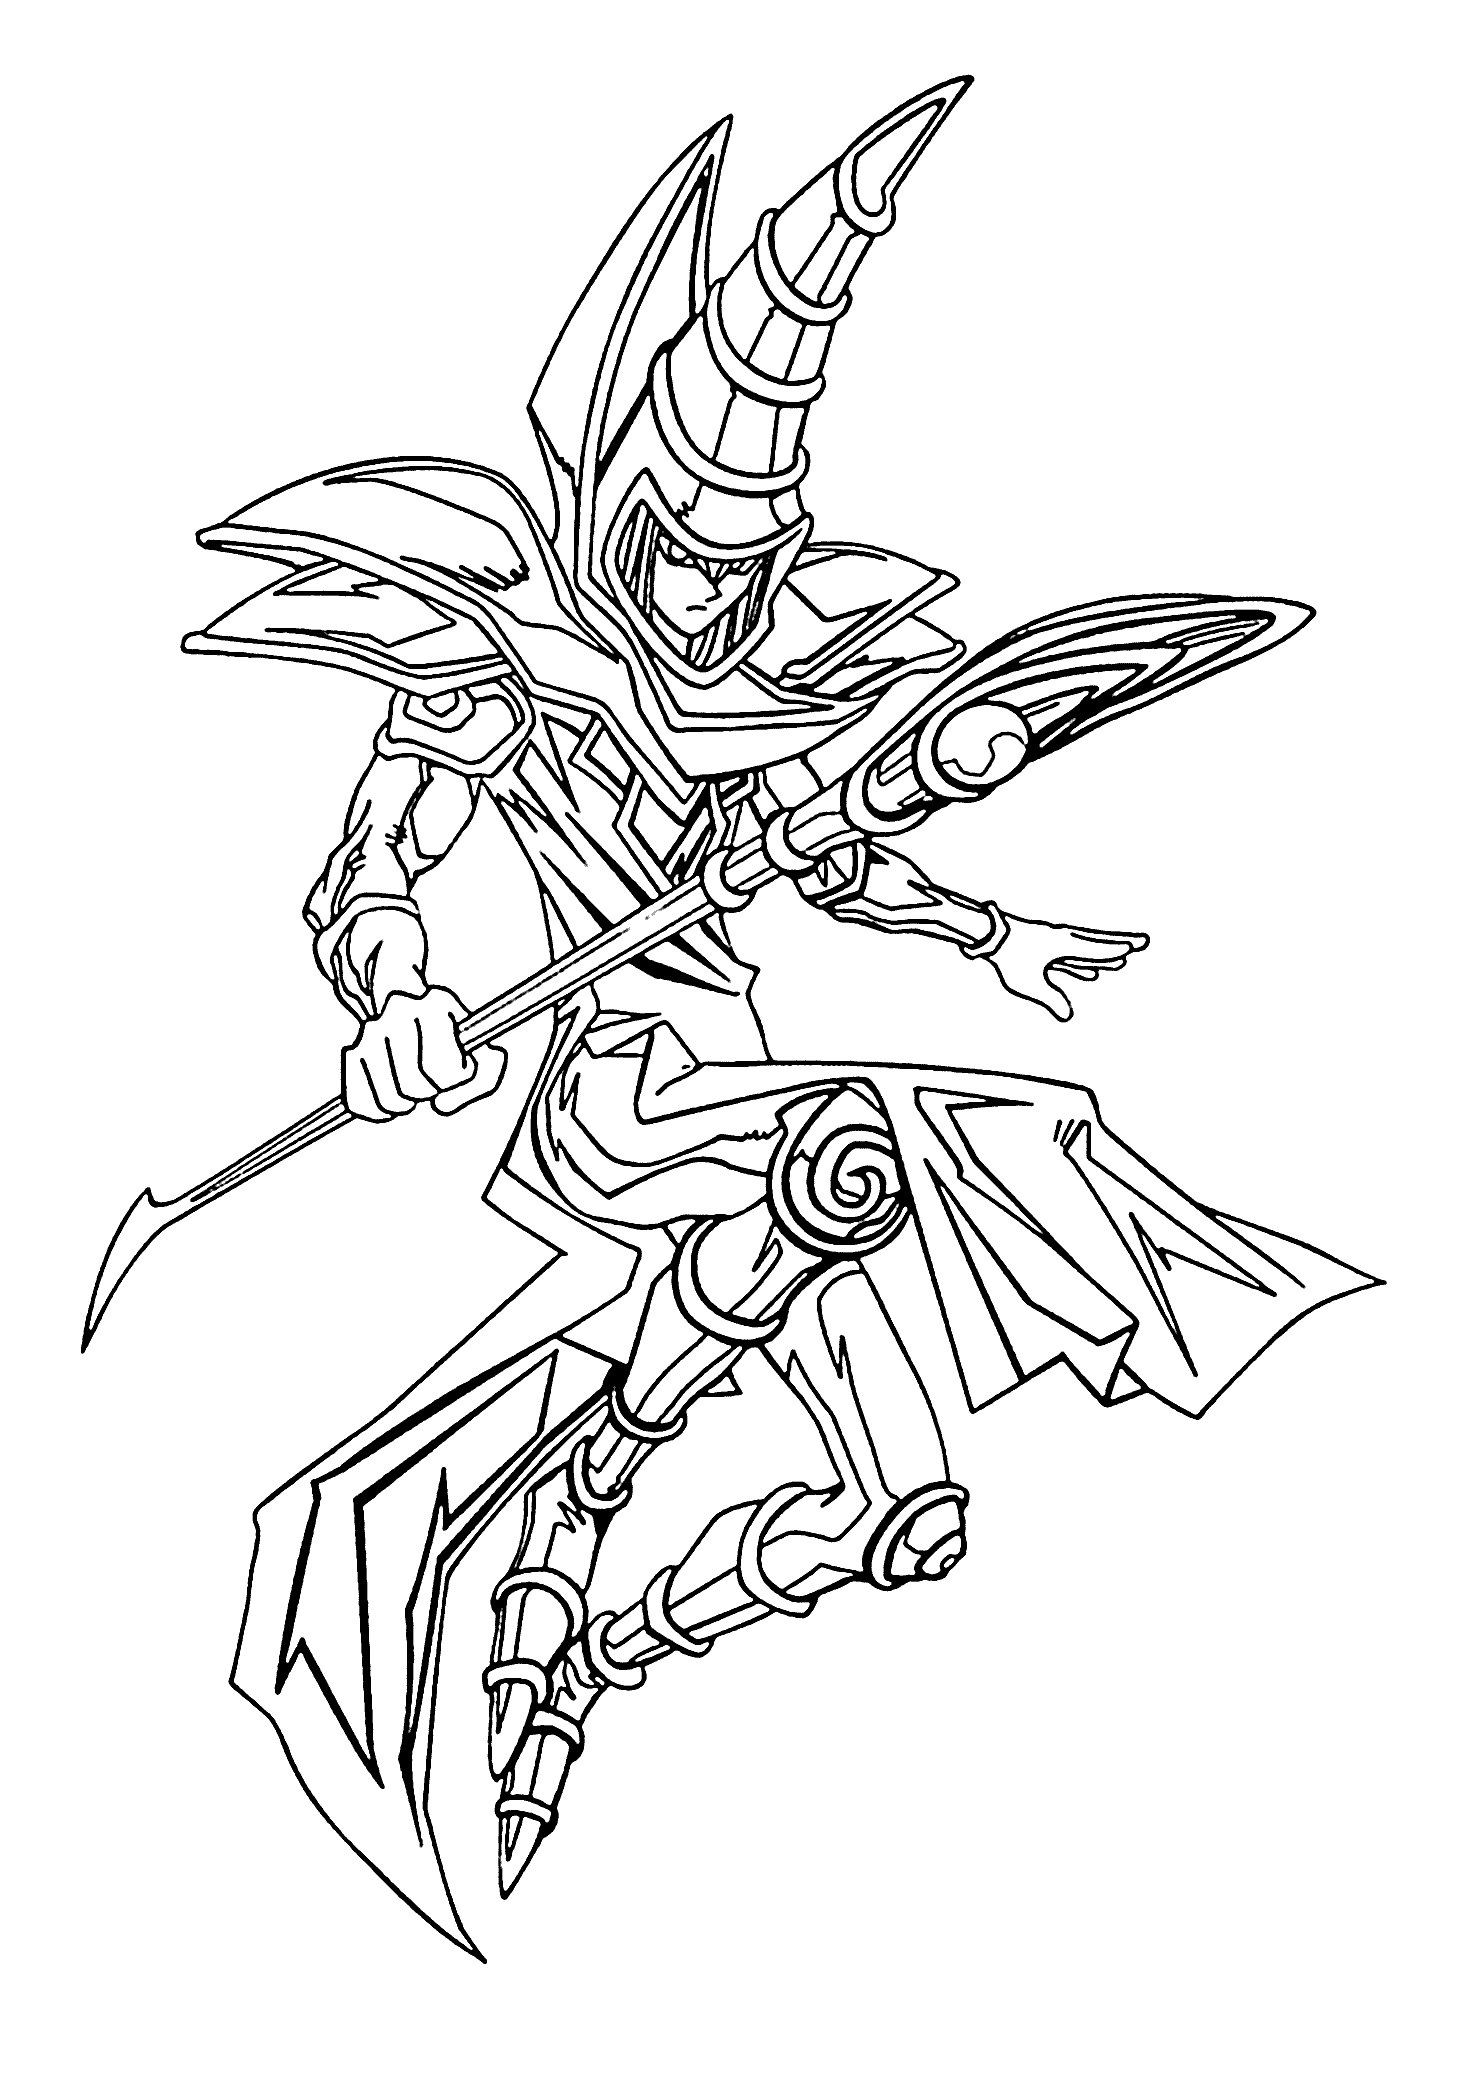 yugioh items coloring pages